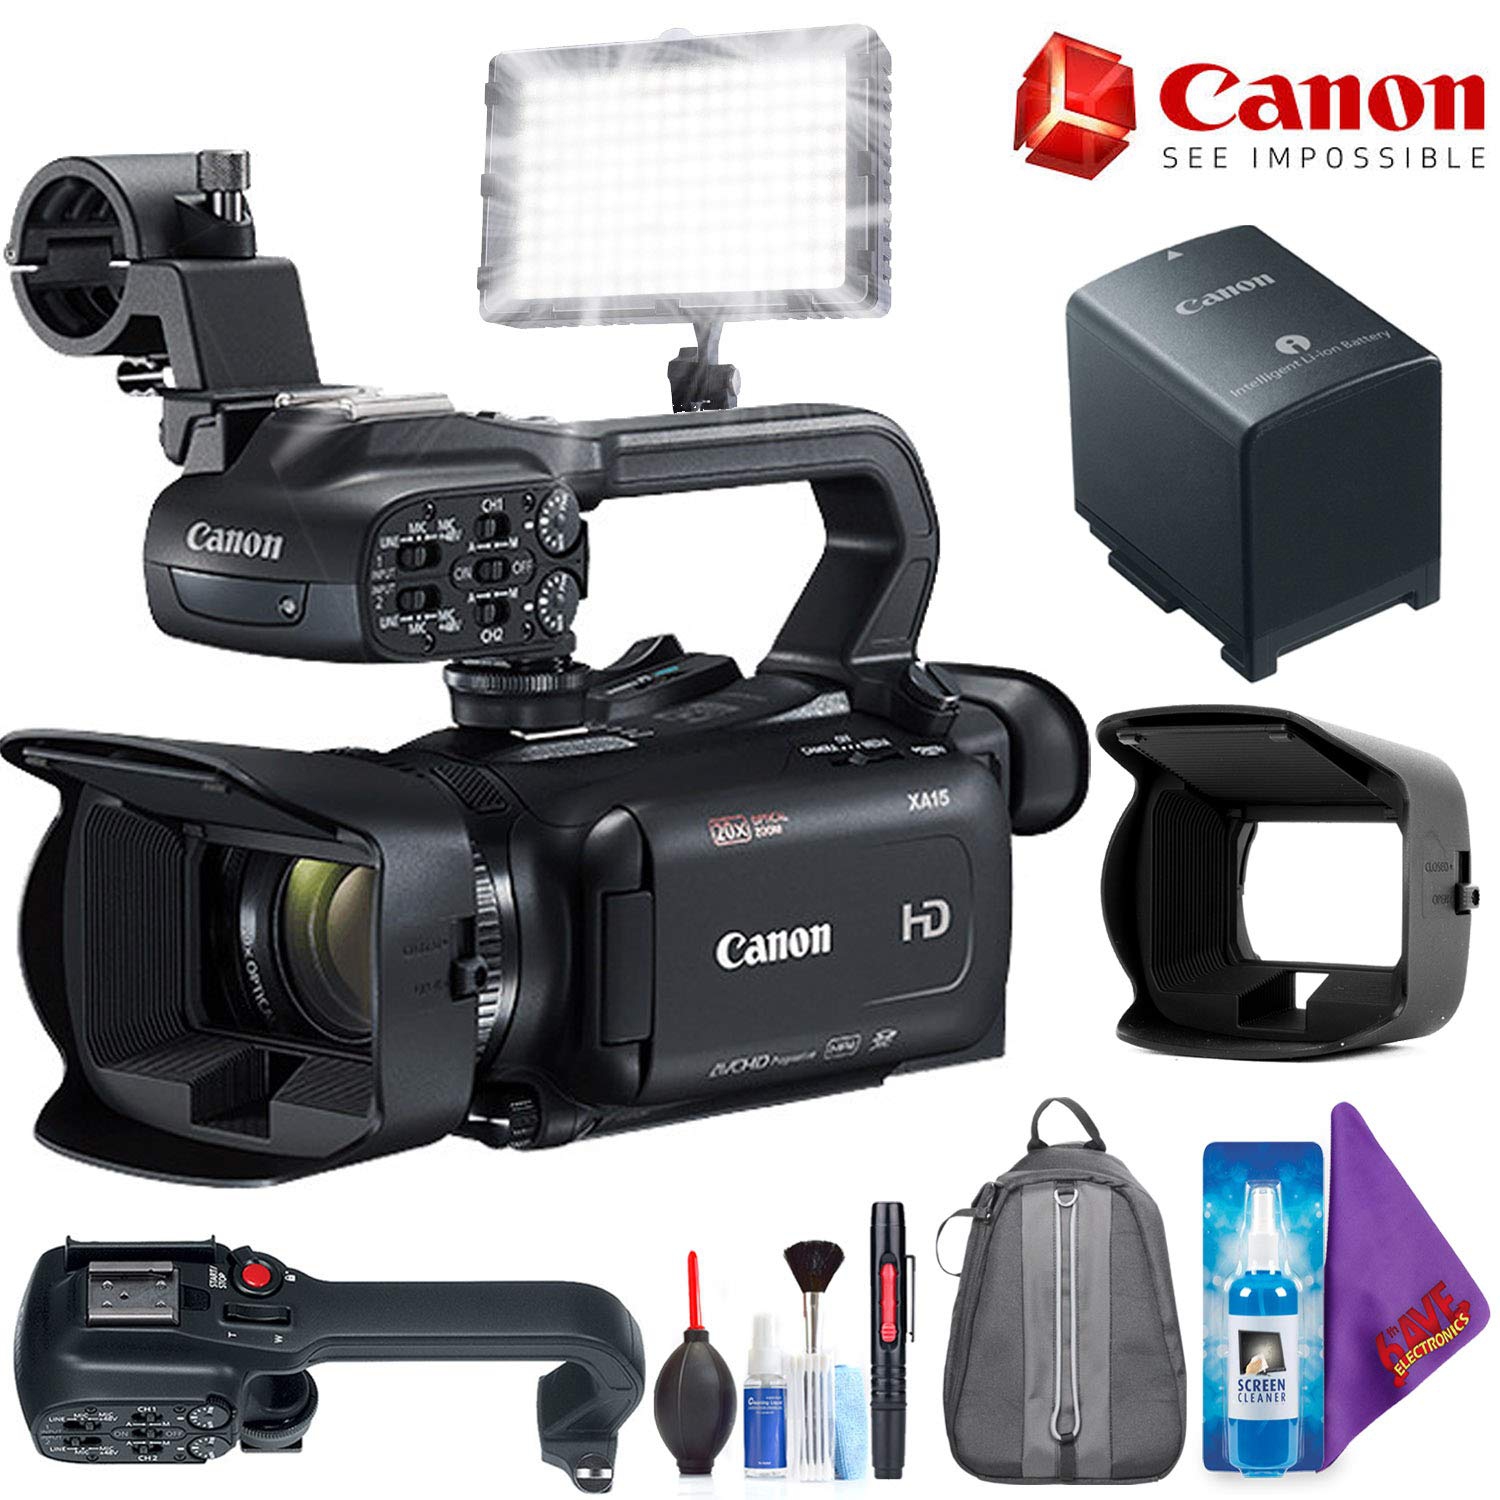 Canon XA15 Compact Full HD Camcorder with SDI, HDMI, and Composite Output + Pro Accessories Bundle